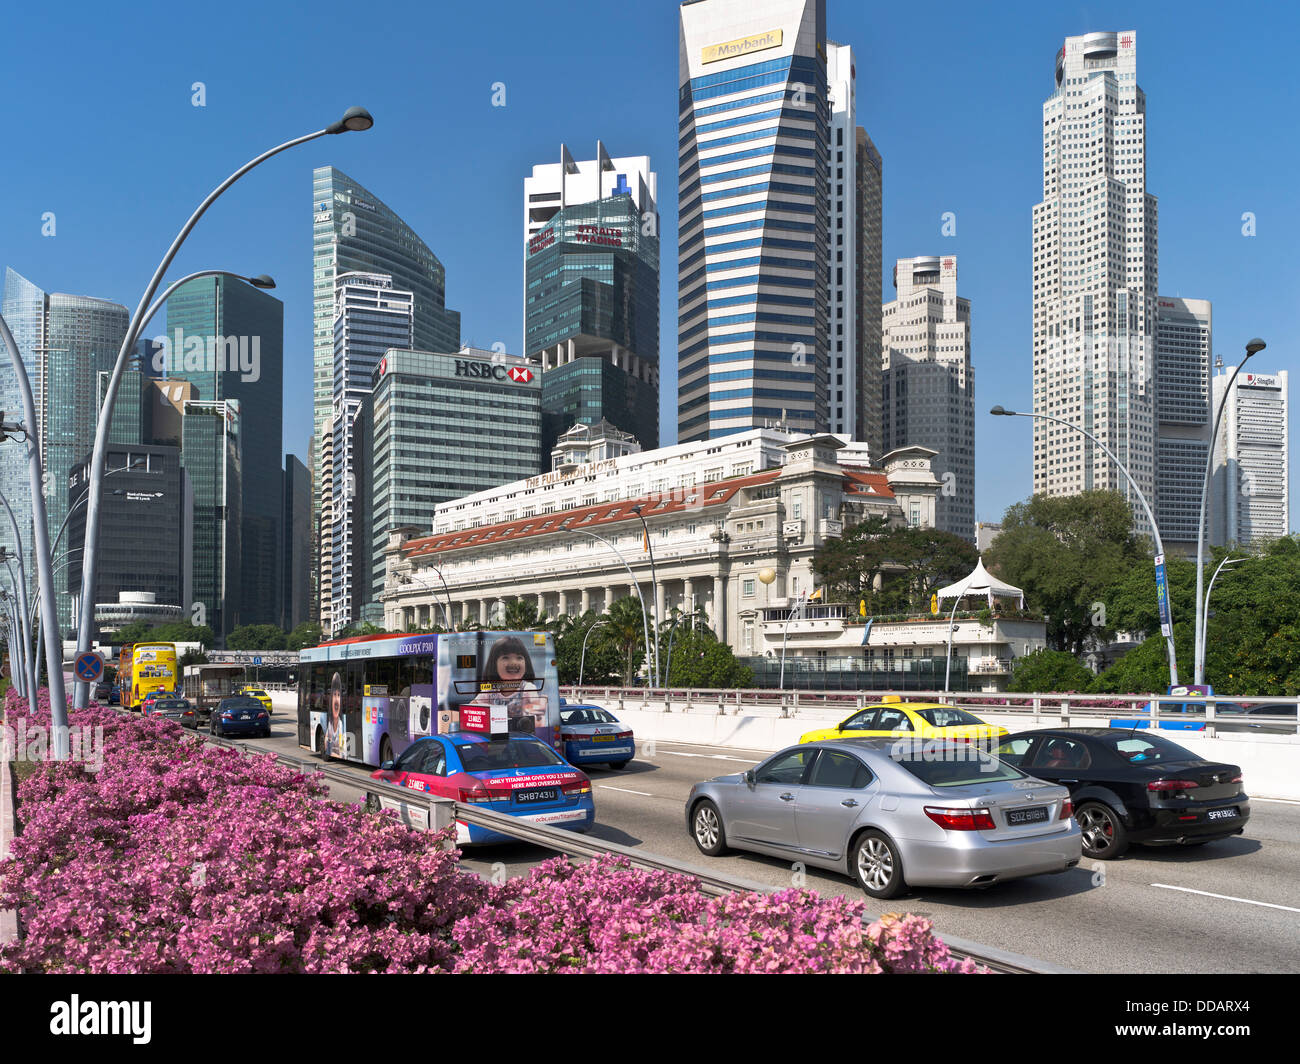 dh Fullerton Hotel DOWNTOWN CORE SINGAPORE Road car traffic flowers Maybank Tower city skyscrapers hotels old new Stock Photo